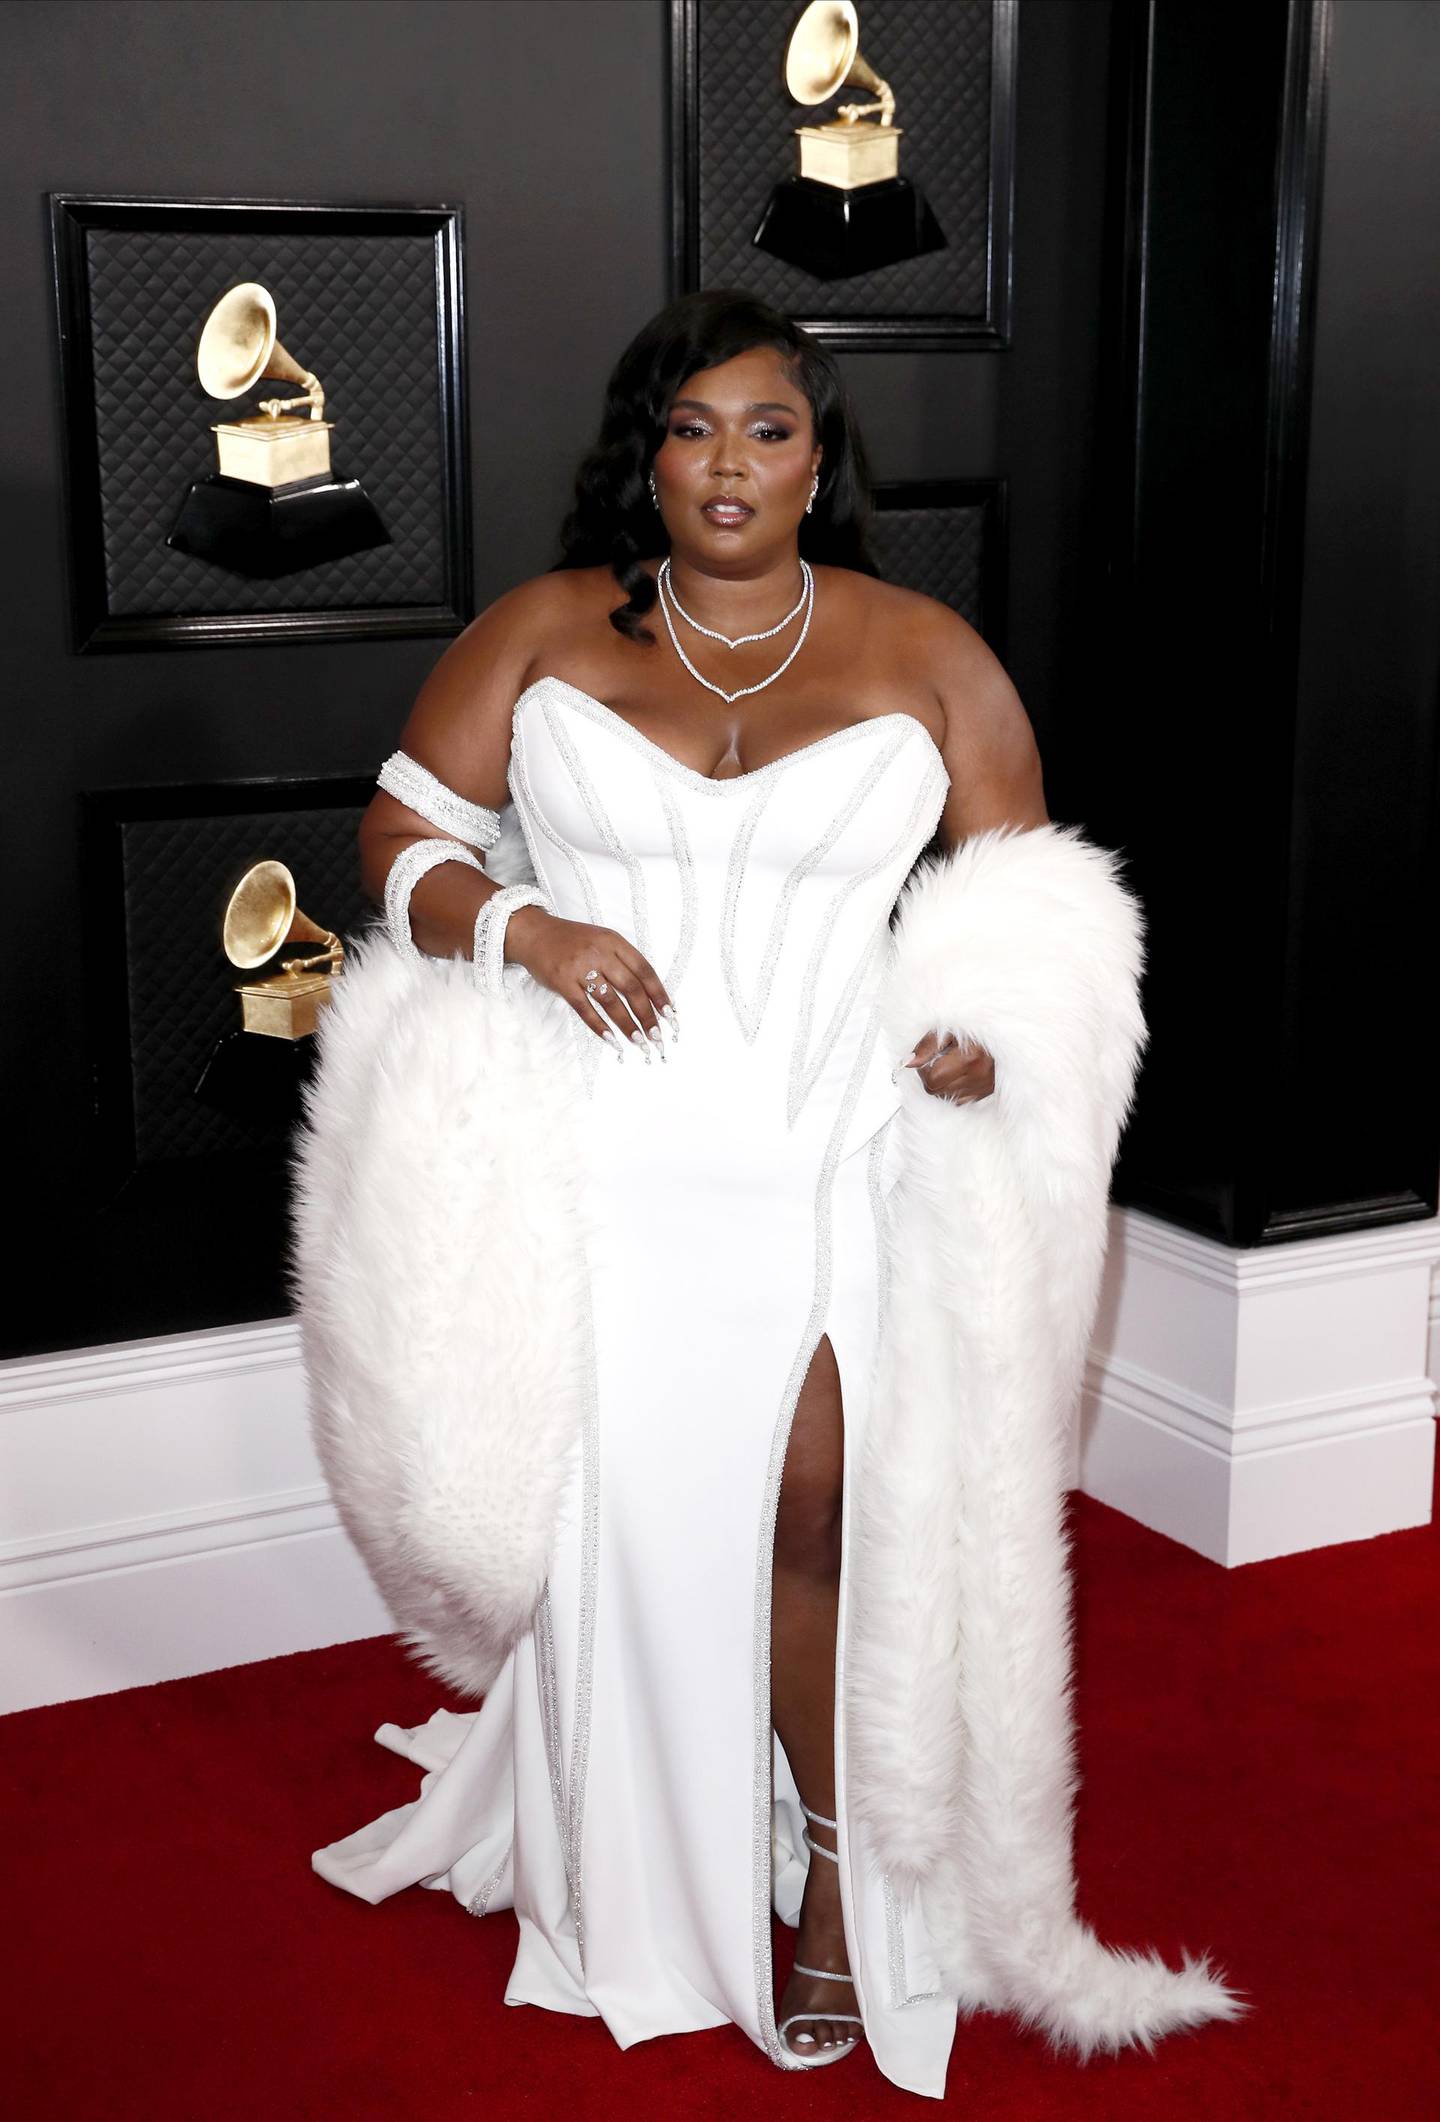 epa08168337 Lizzo arrives for the 62nd Annual Grammy Awards ceremony at the Staples Center in Los Angeles, California, USA, 26 January 2020. Dress by Atelier Versale . EPA-EFE/ETIENNE LAURENT